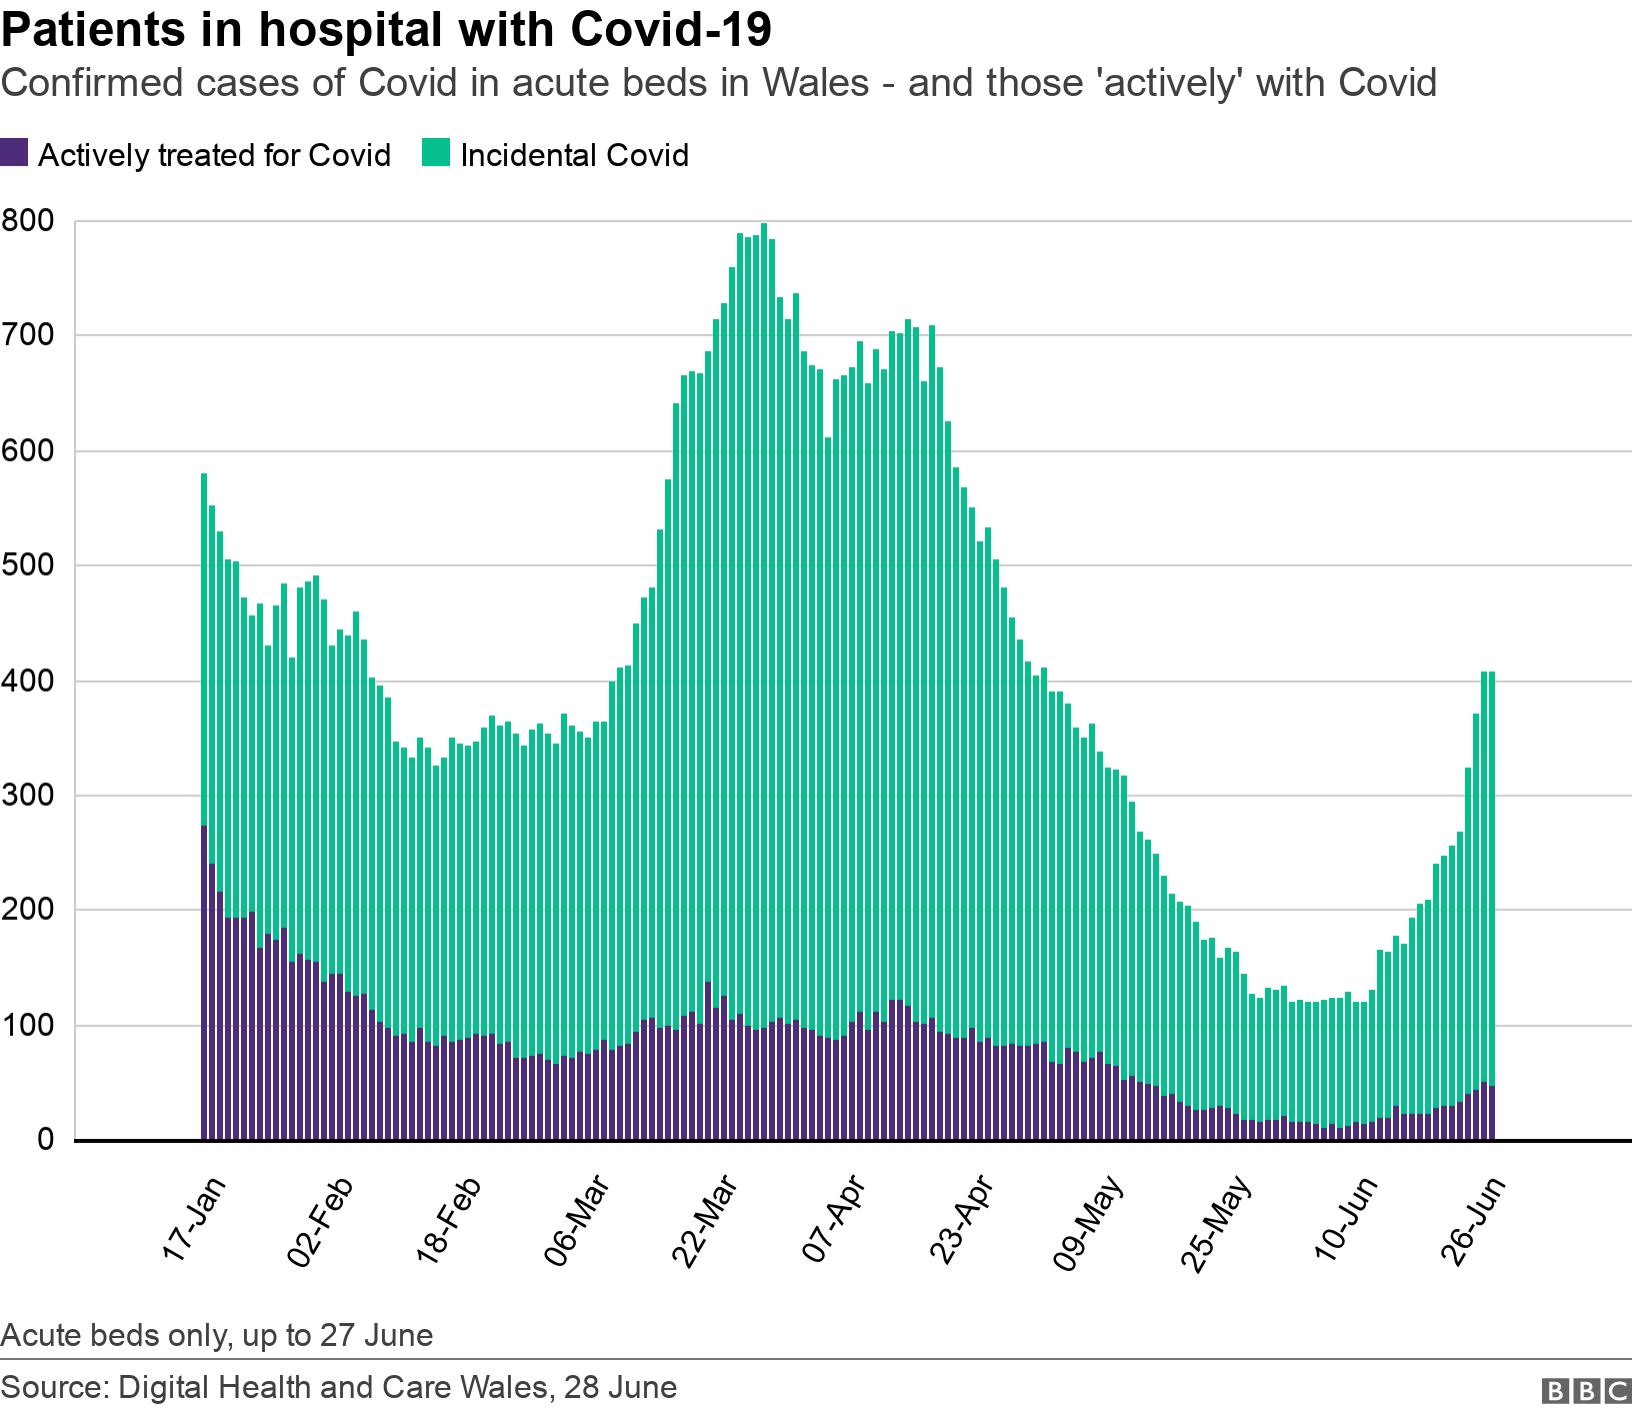 Patients in hospital with Covid-19. Confirmed cases of Covid in acute beds in Wales - and those 'actively' with Covid.  Acute beds only, up to 27 June.